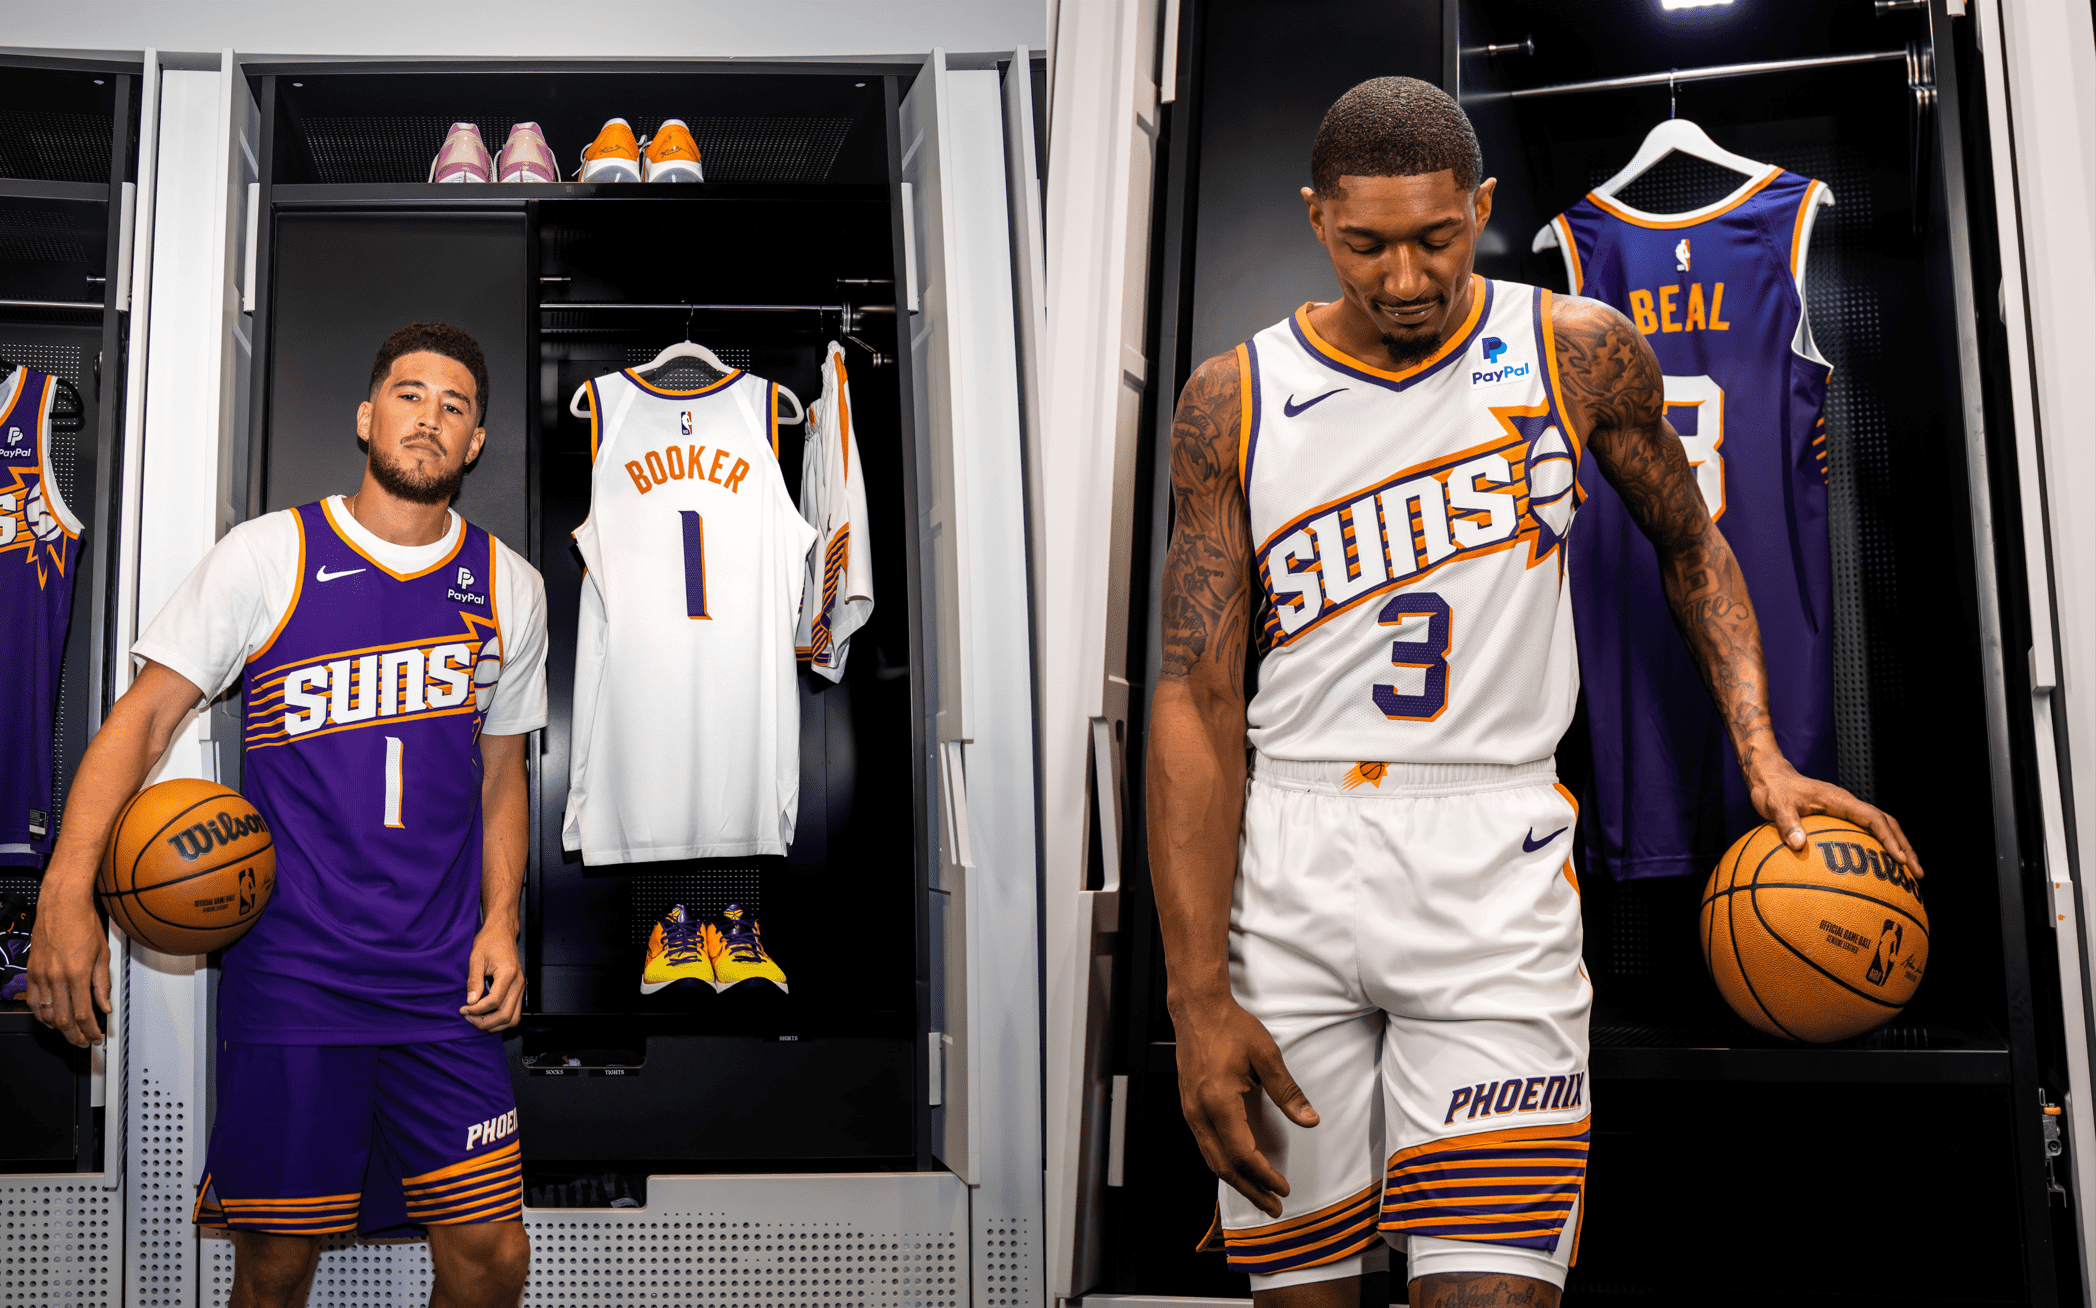 Sacramento Kings go ahead and officially unveil new uniforms